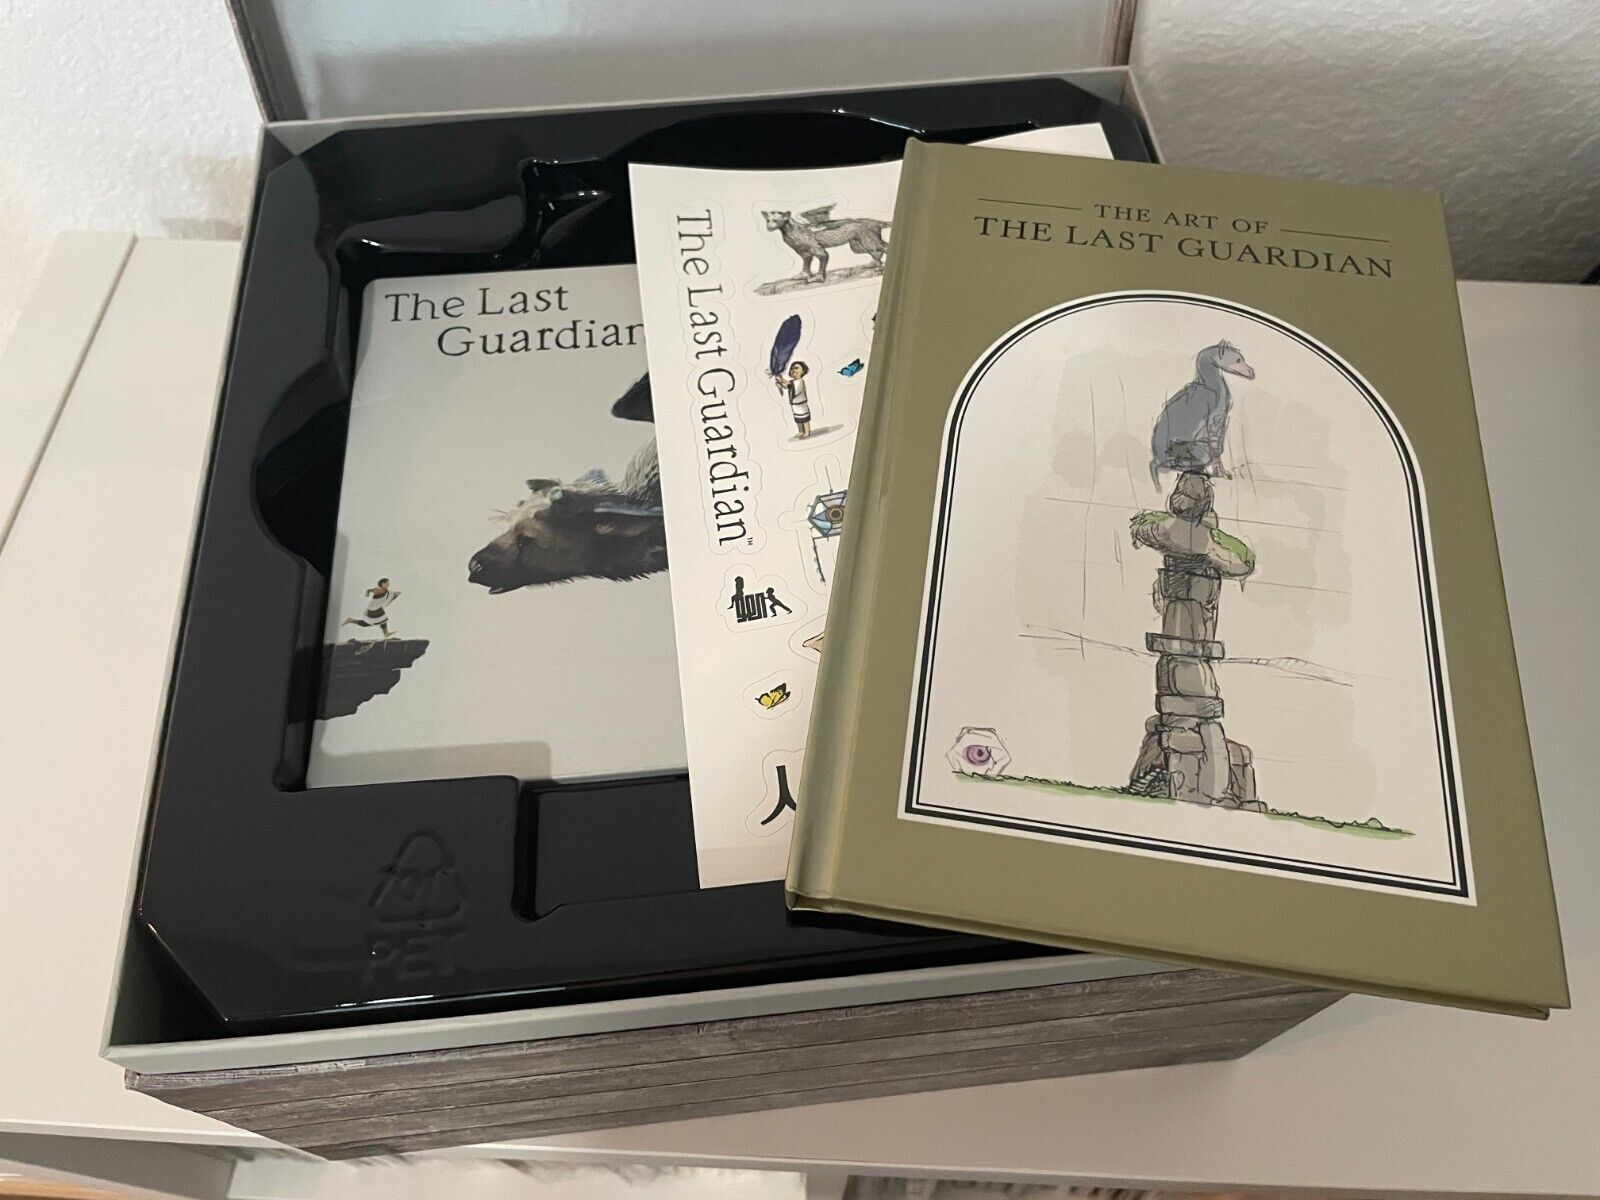 The Last Guardian, Only On PlayStation Classic Collection Steelbook